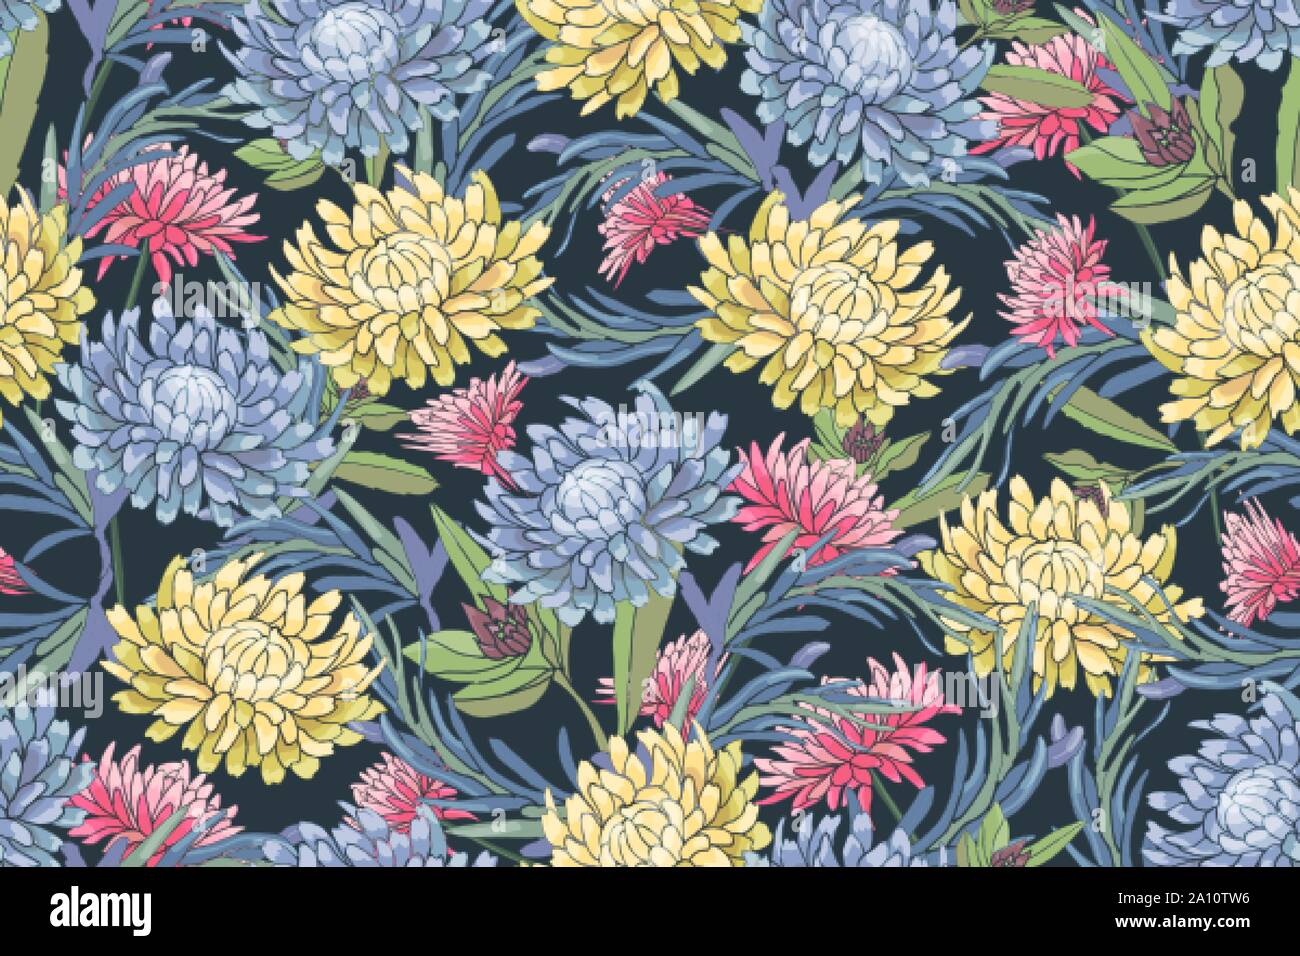 Vector floral seamless pattern. Light blue, pink and yellow autumn asters, chrysanthemum. Stock Vector